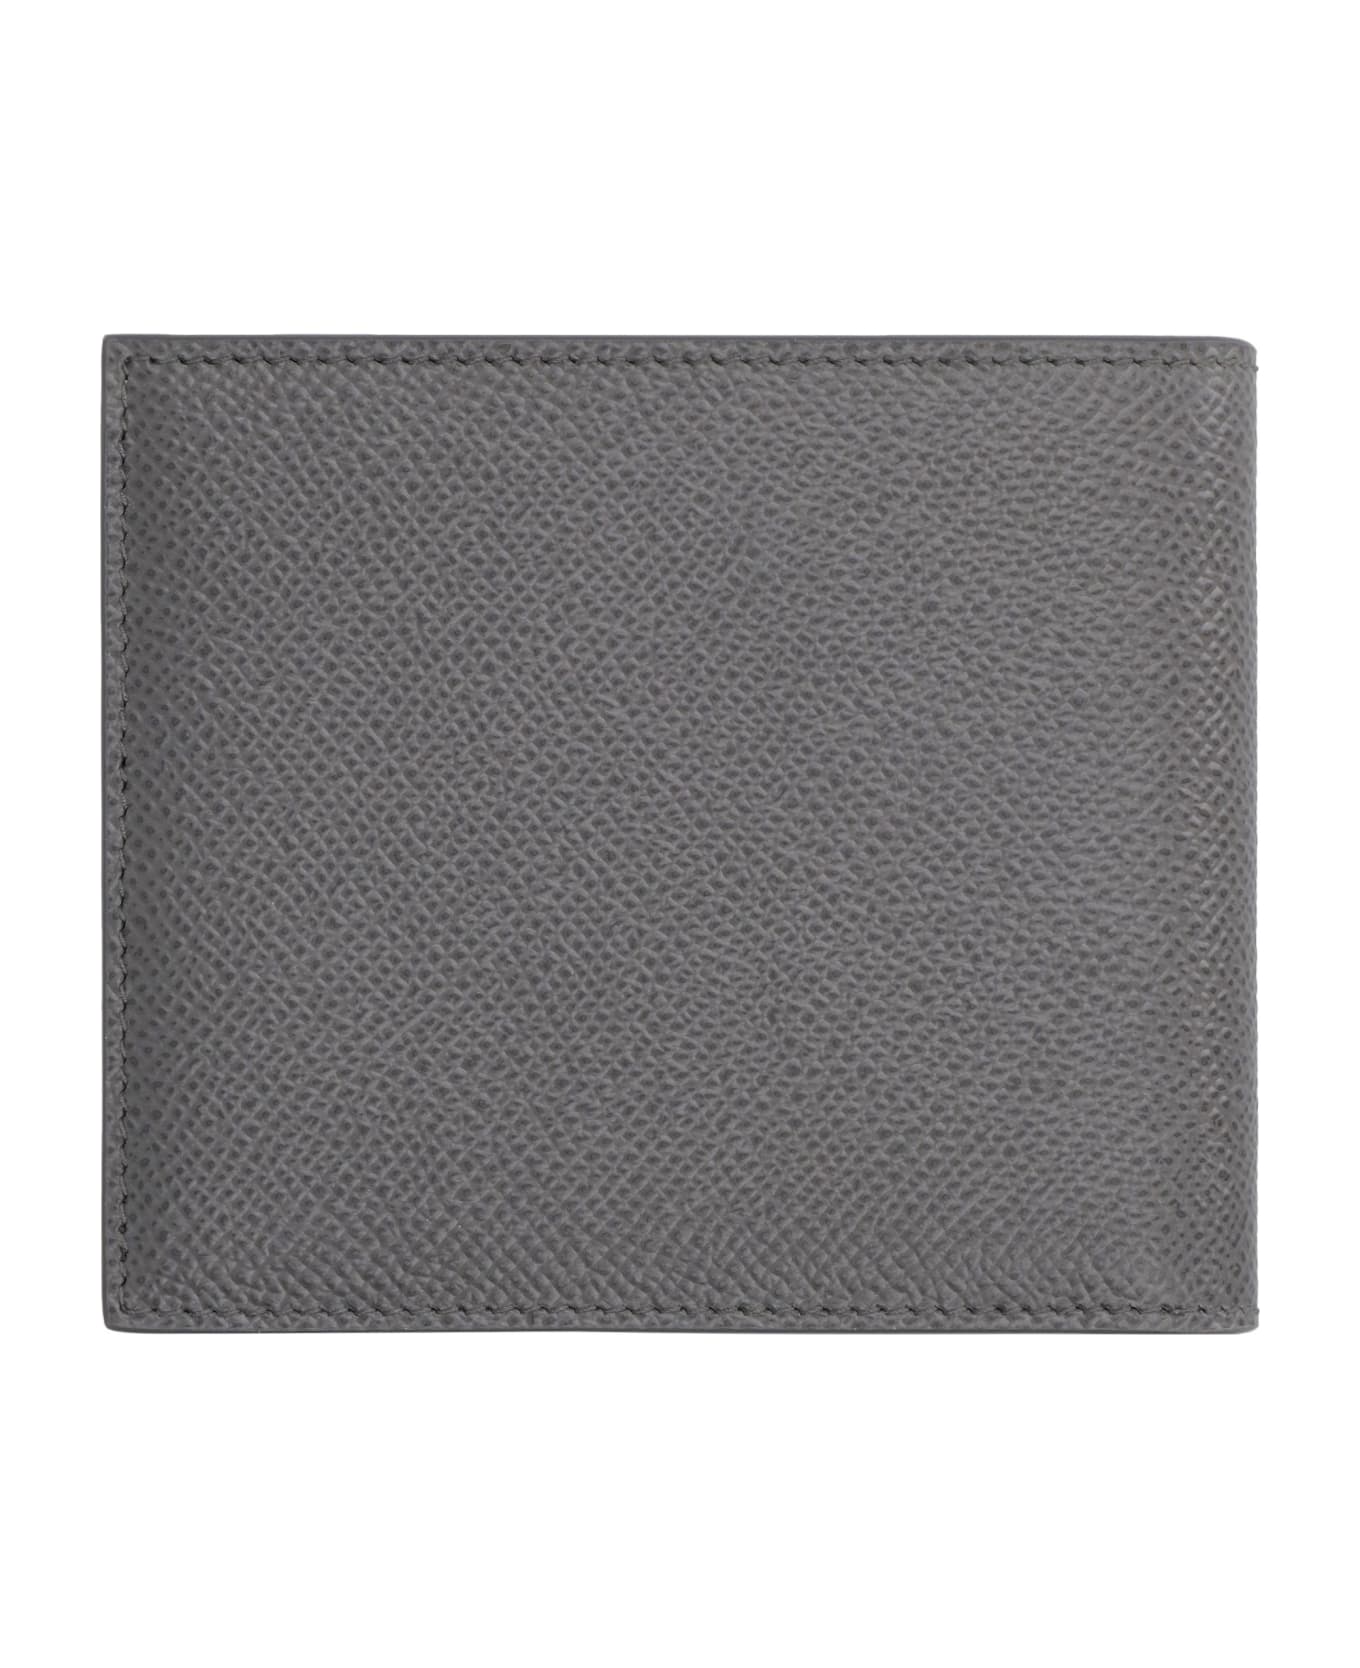 Dolce & Gabbana Leather Flap-over Wallet - grey 財布